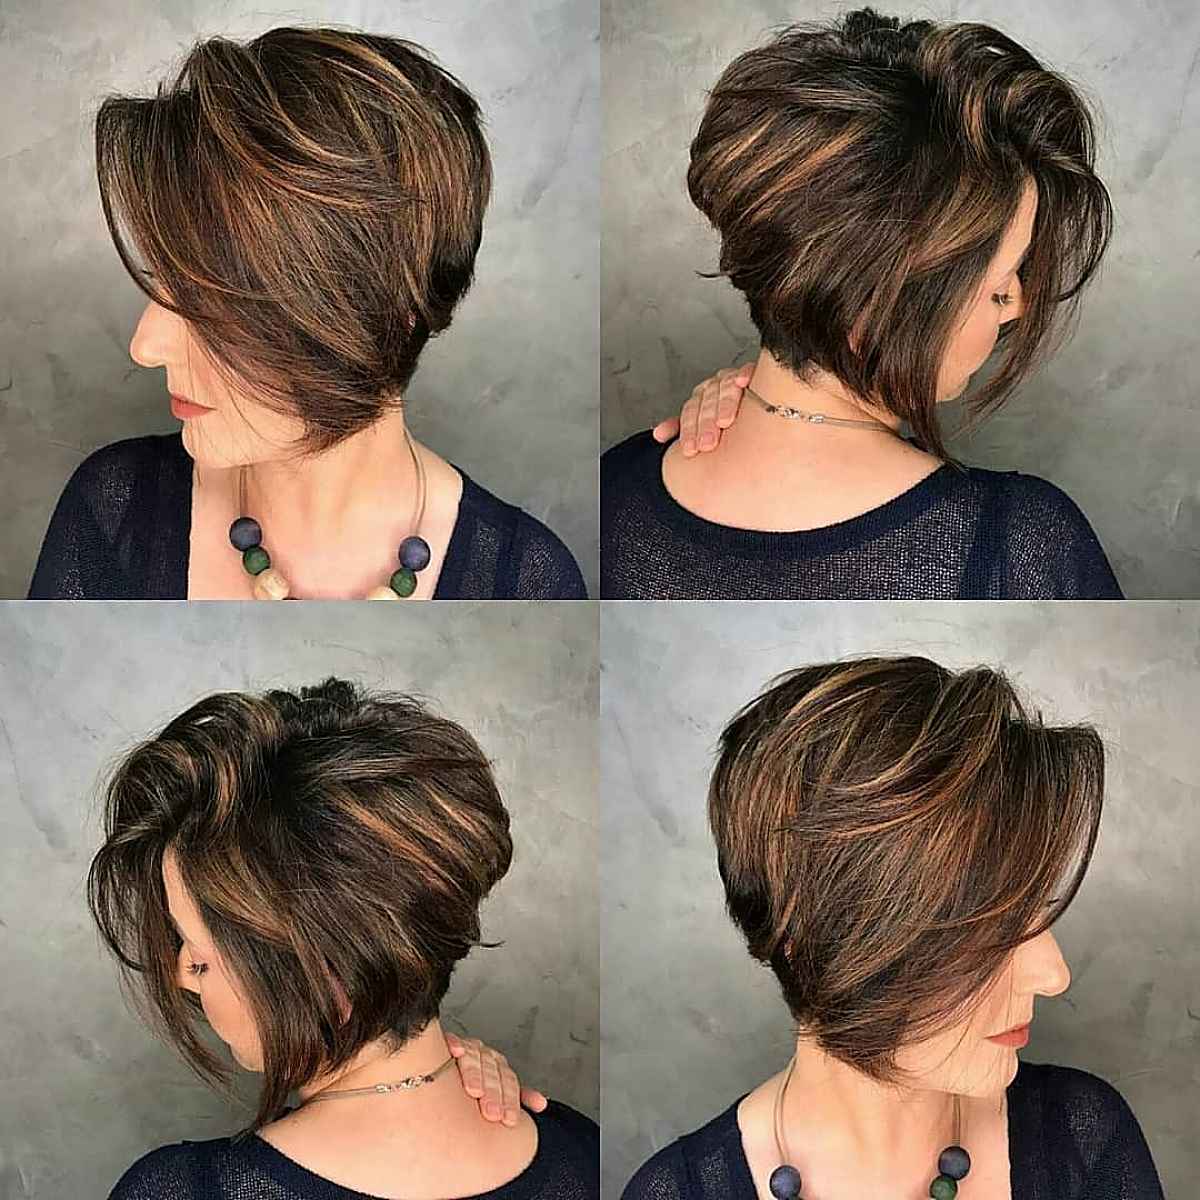 25 Coolest Ways to Get an Angled Bob with Layers